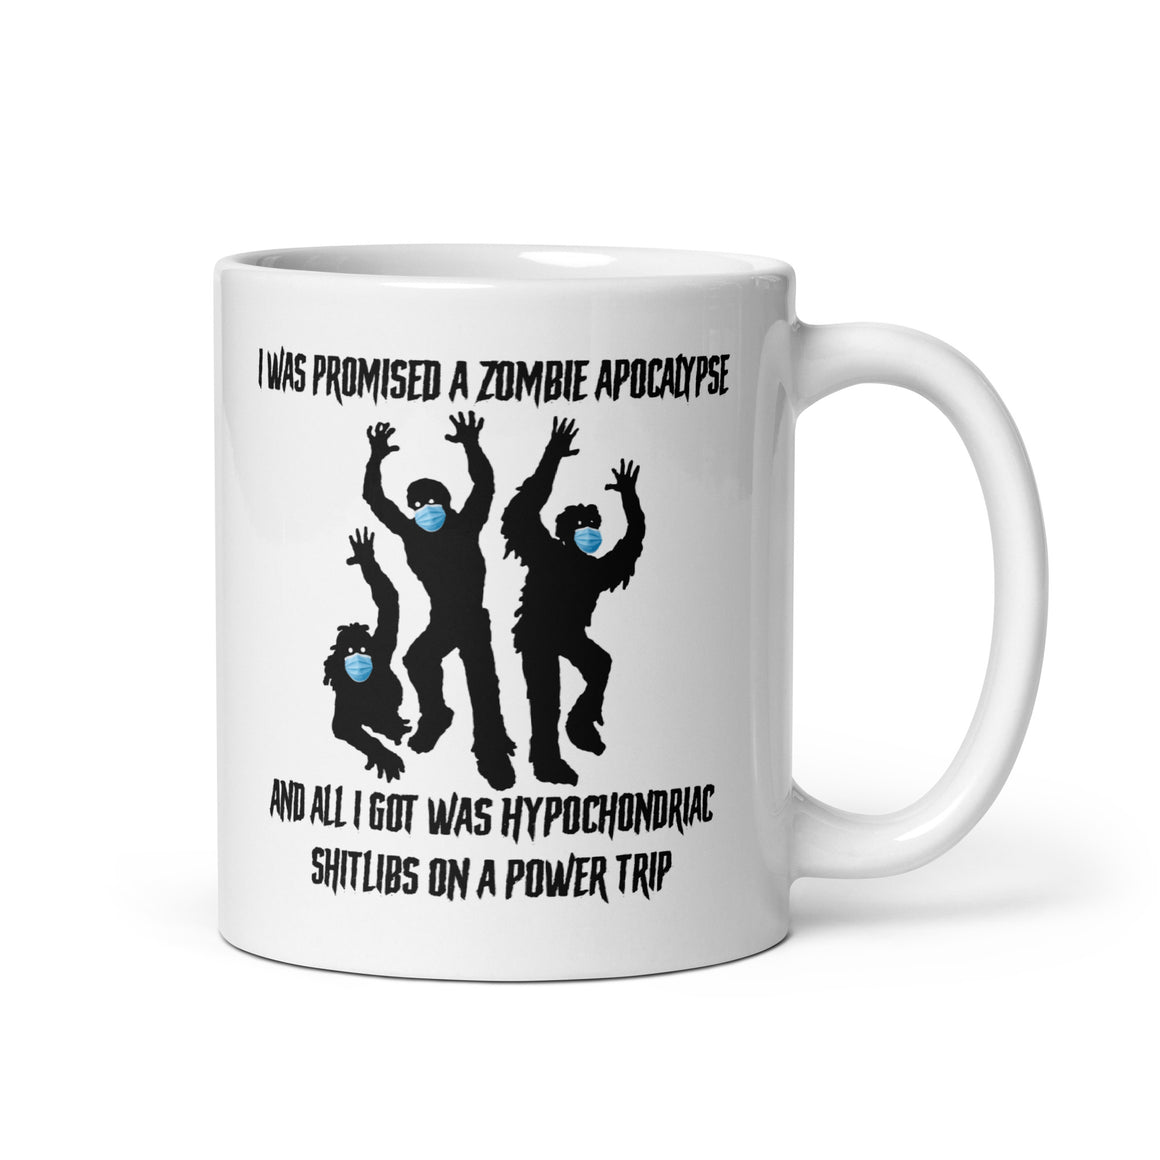 I Was Promised a Zombie Apocalypse And All I Got Was Hypochondriac Shitlibs on a Power Trip Coffee Mug By Libertarian Country